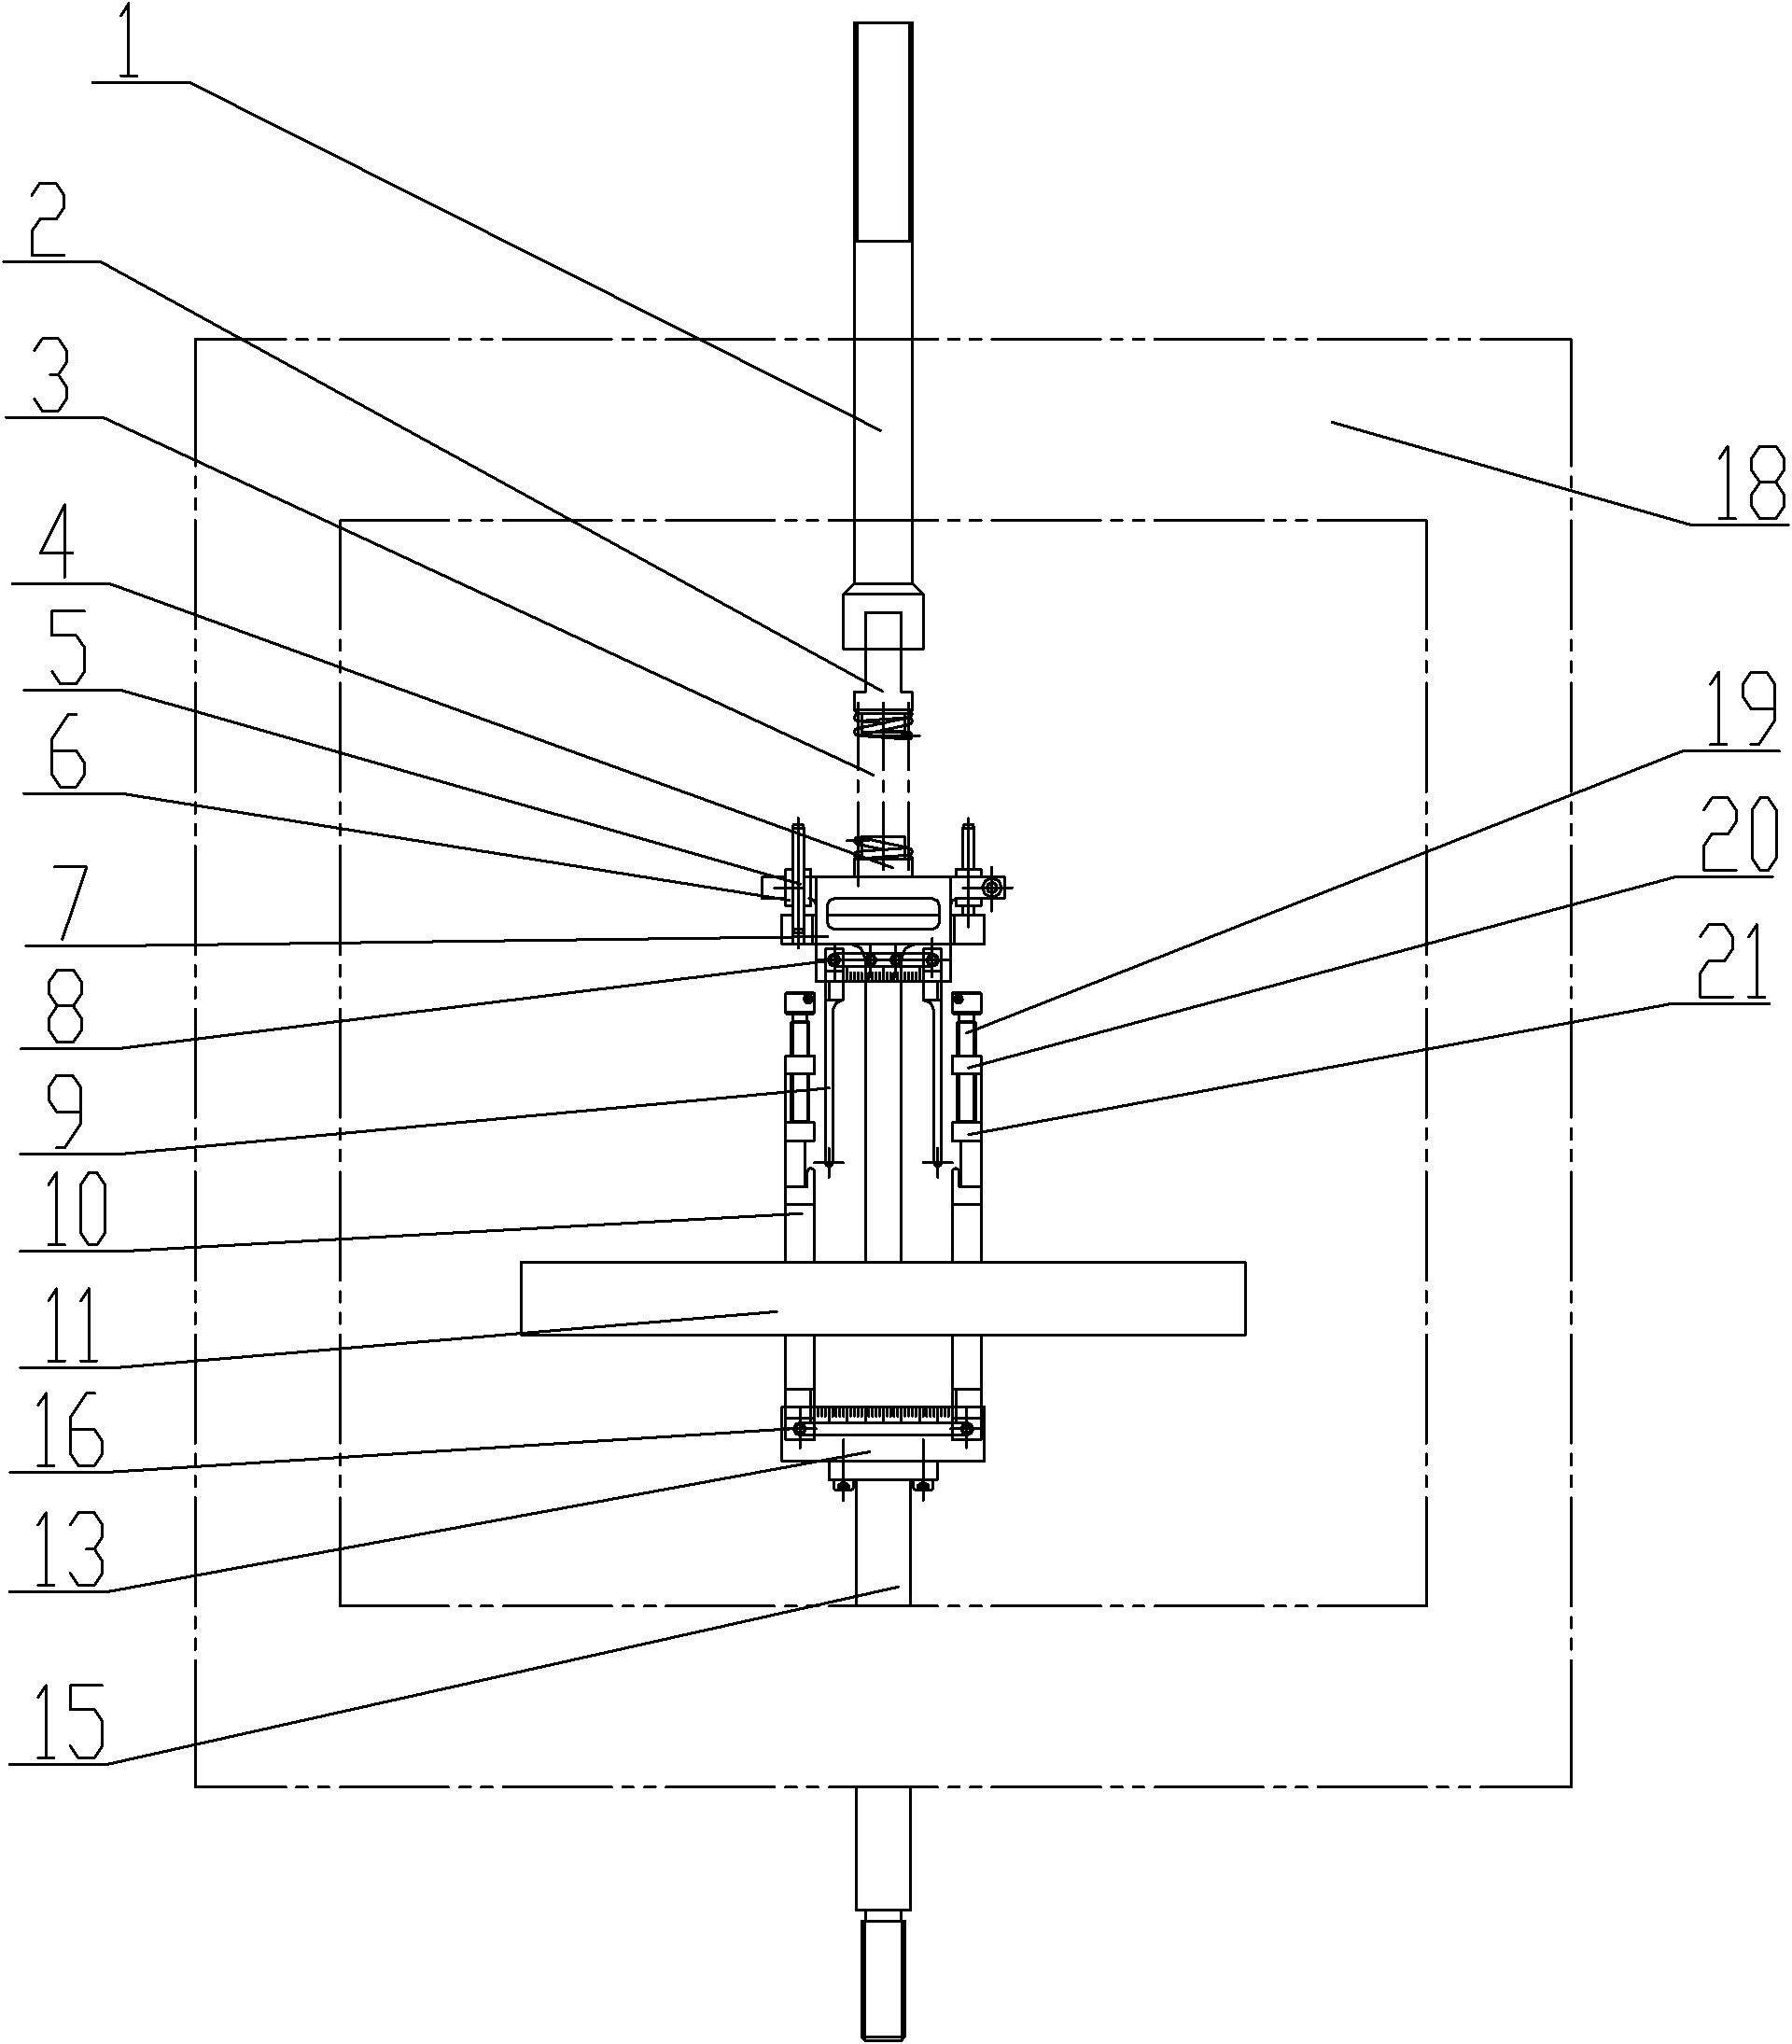 Three-point or four-point bending fatigue test fixture for living rat ulna